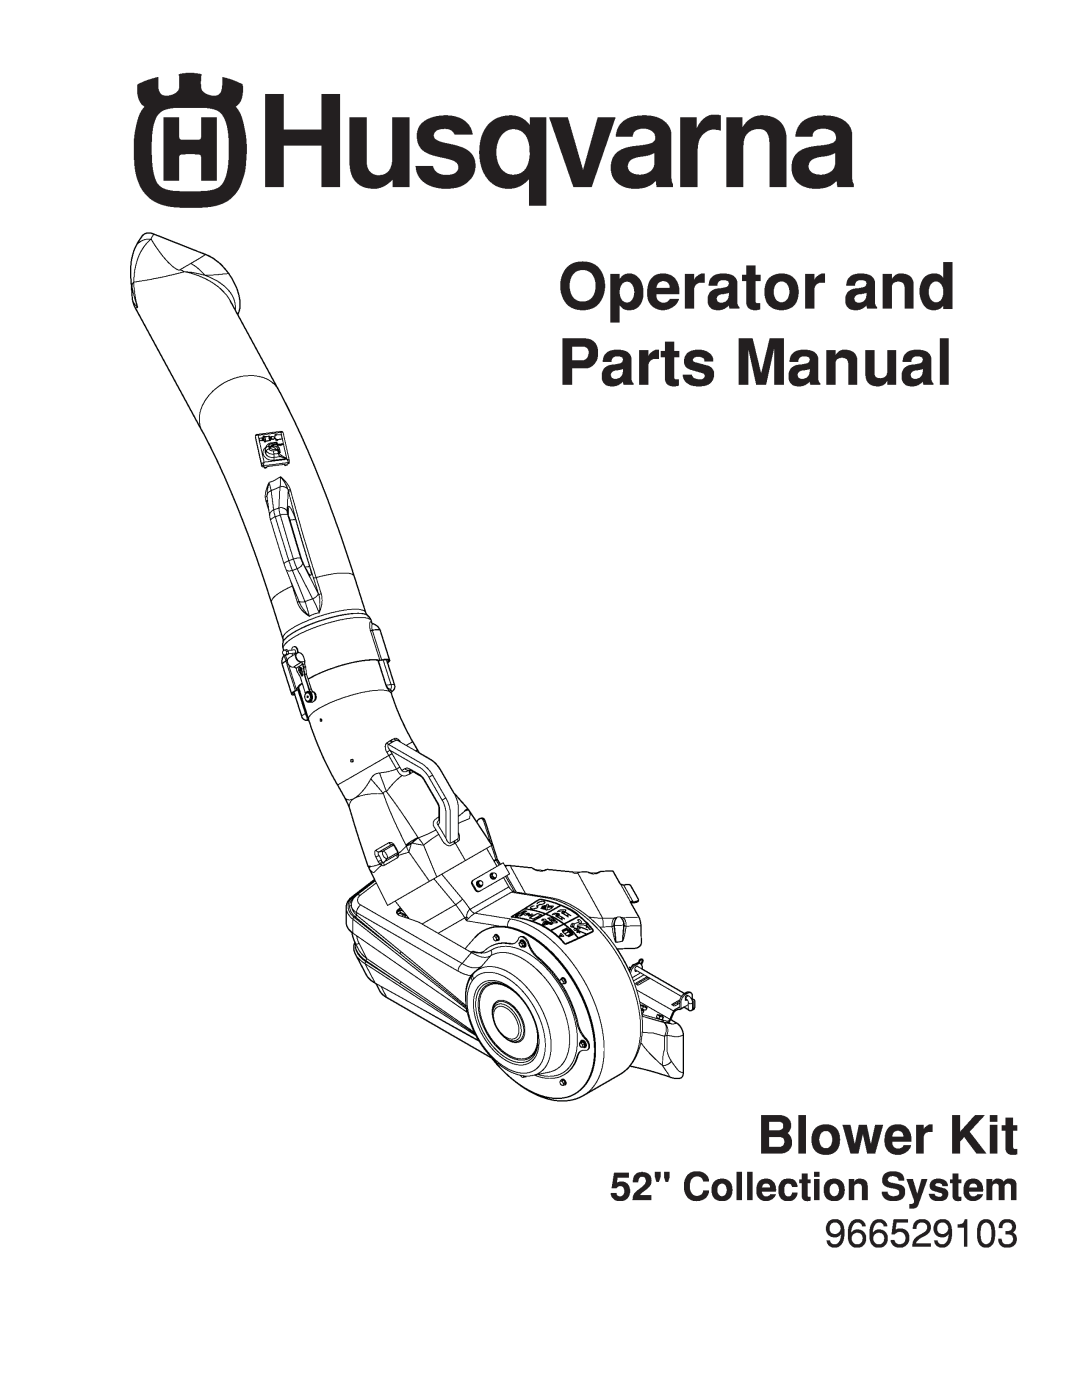 Husqvarna 966529103 manual Operator and Parts Manual, Blower Kit, Collection System 